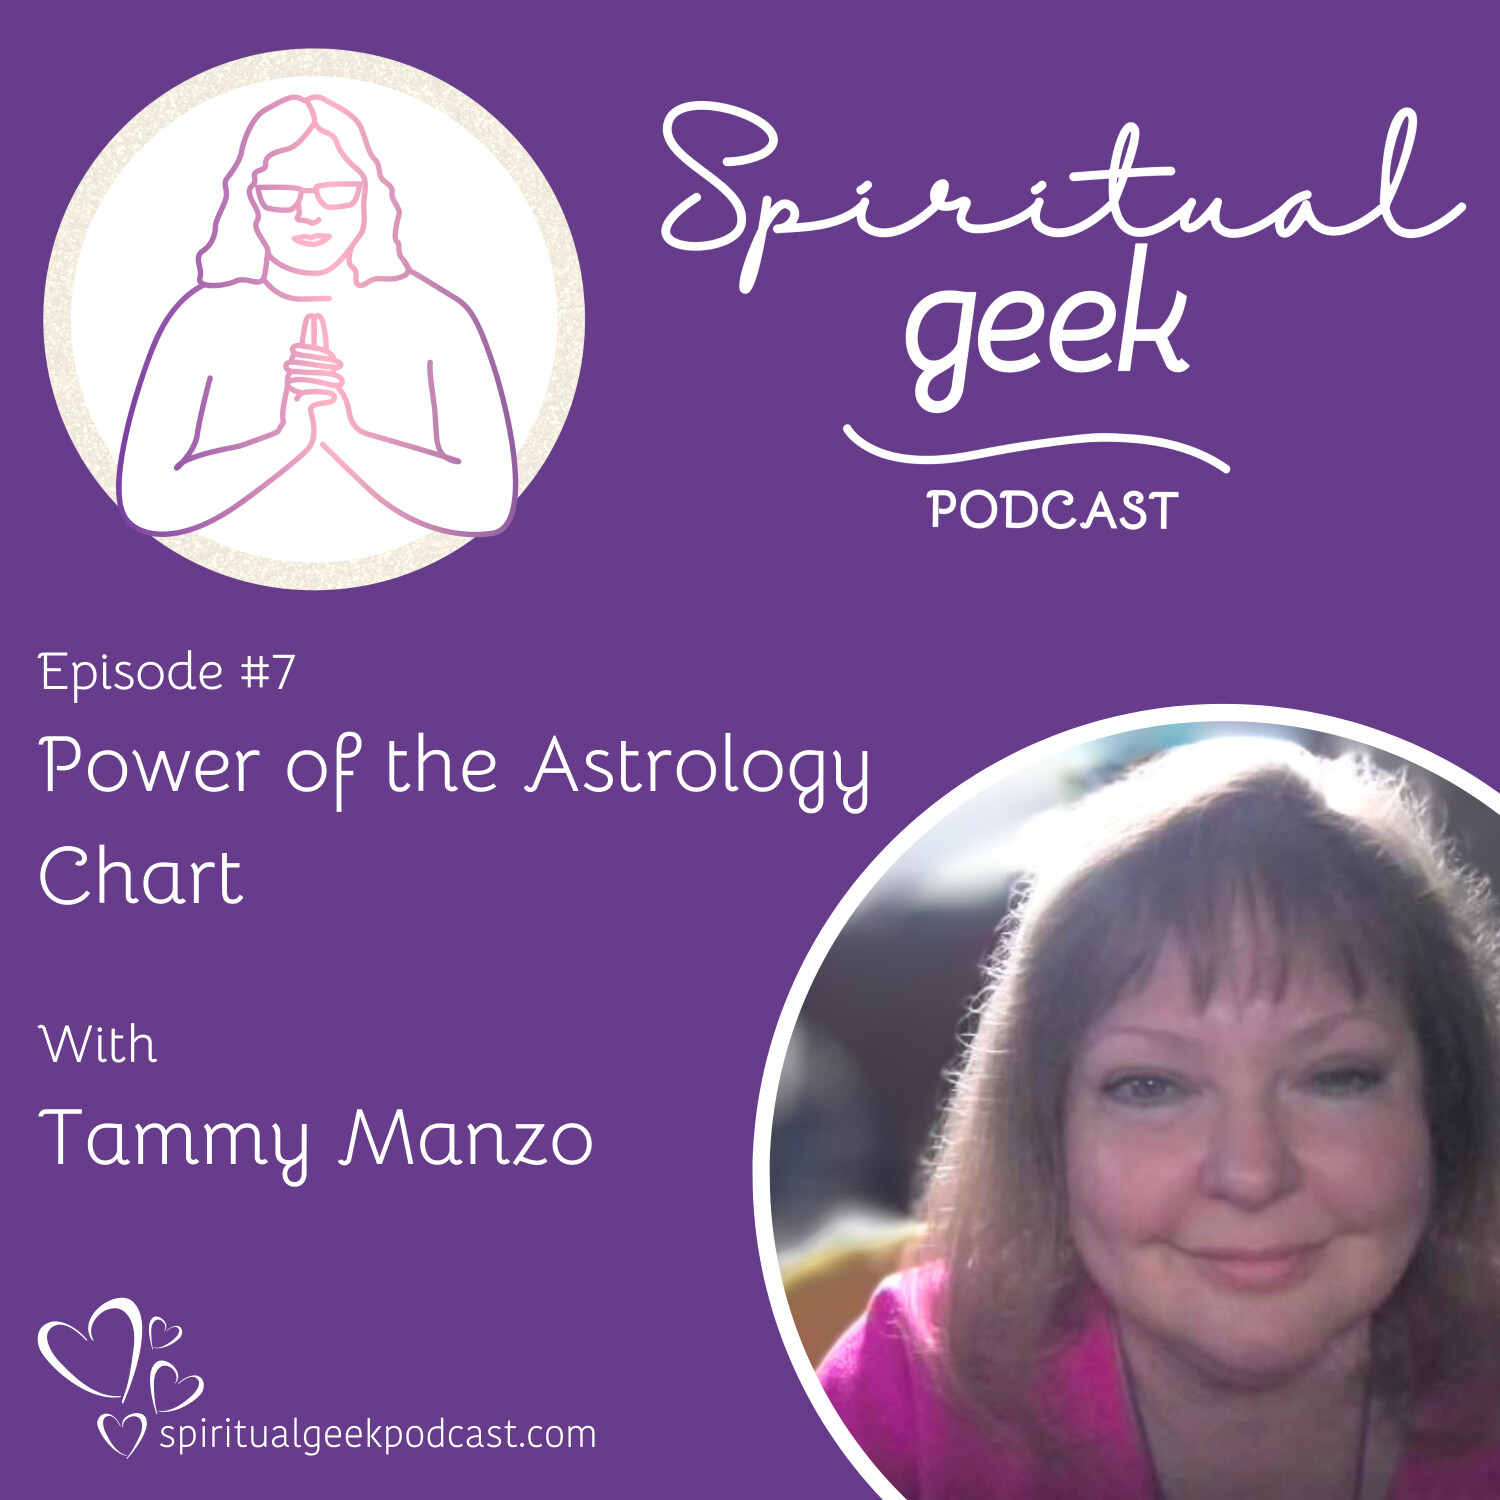 The Power of the Astrology Chart with Tammy Manzo